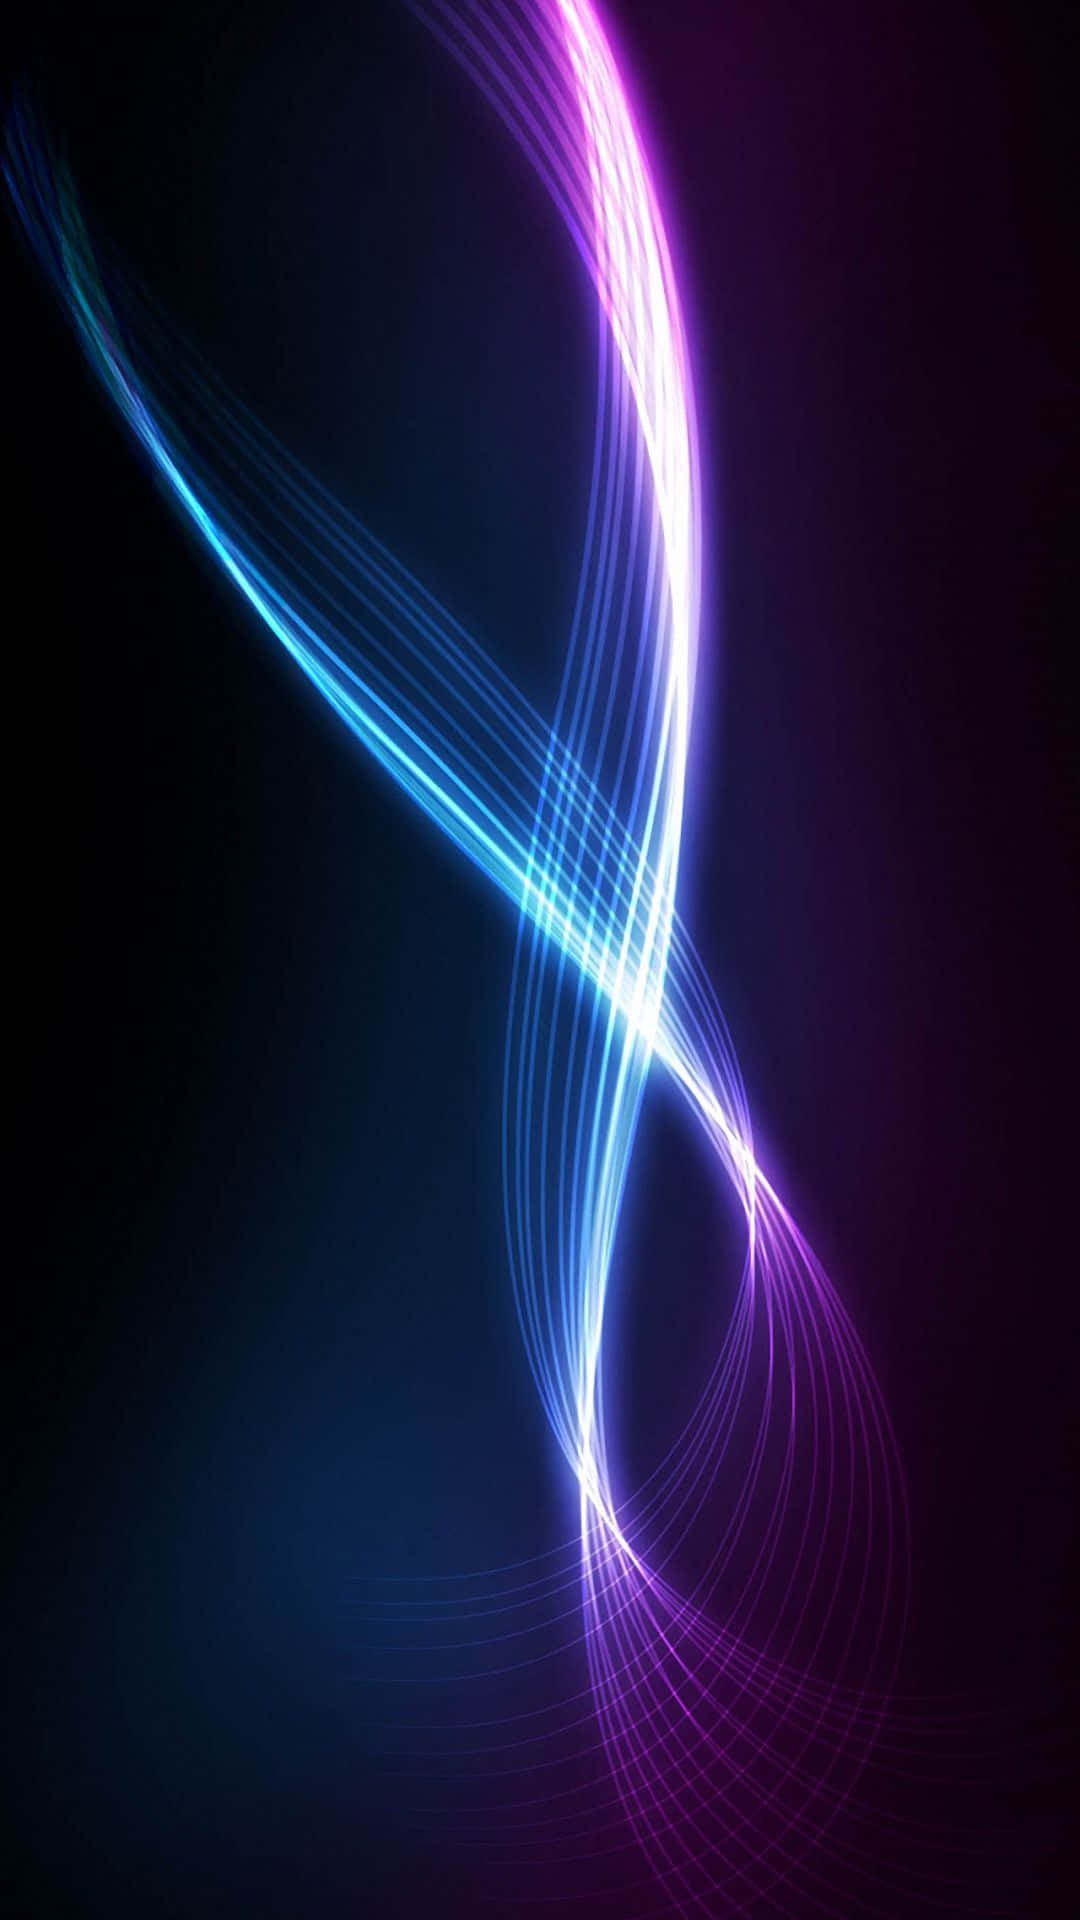 Free Galaxy S5 Wallpaper Downloads, [100+] Galaxy S5 Wallpapers for FREE |  